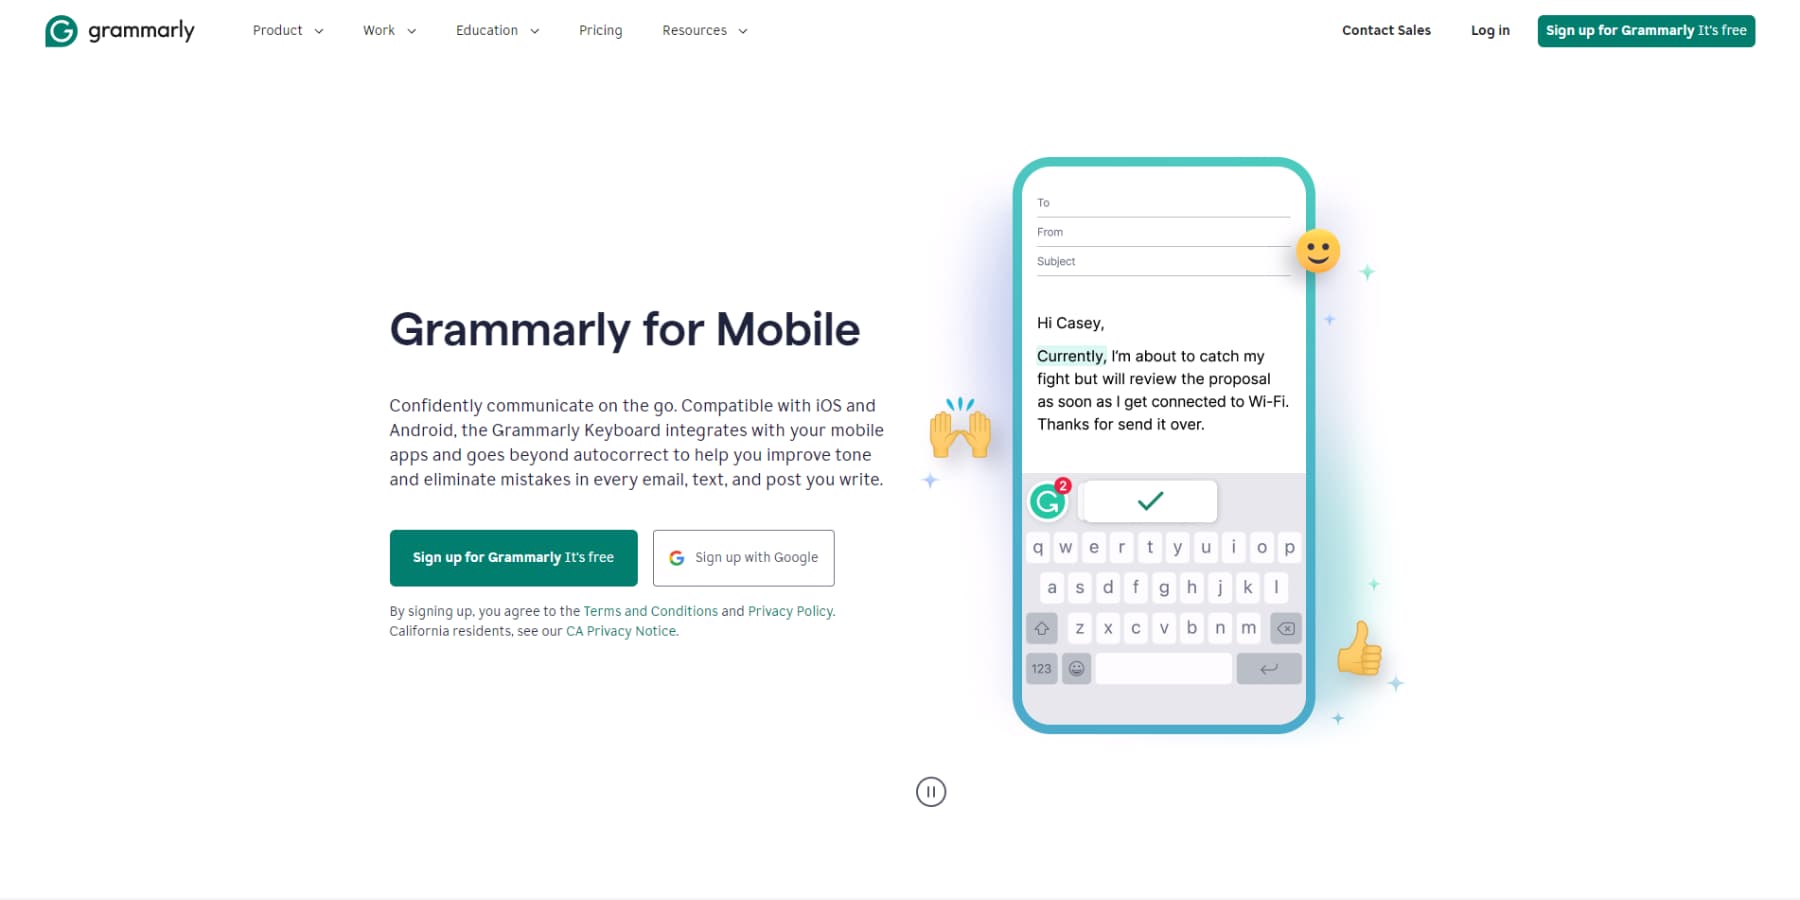 A screenshot of Grammarly's home page